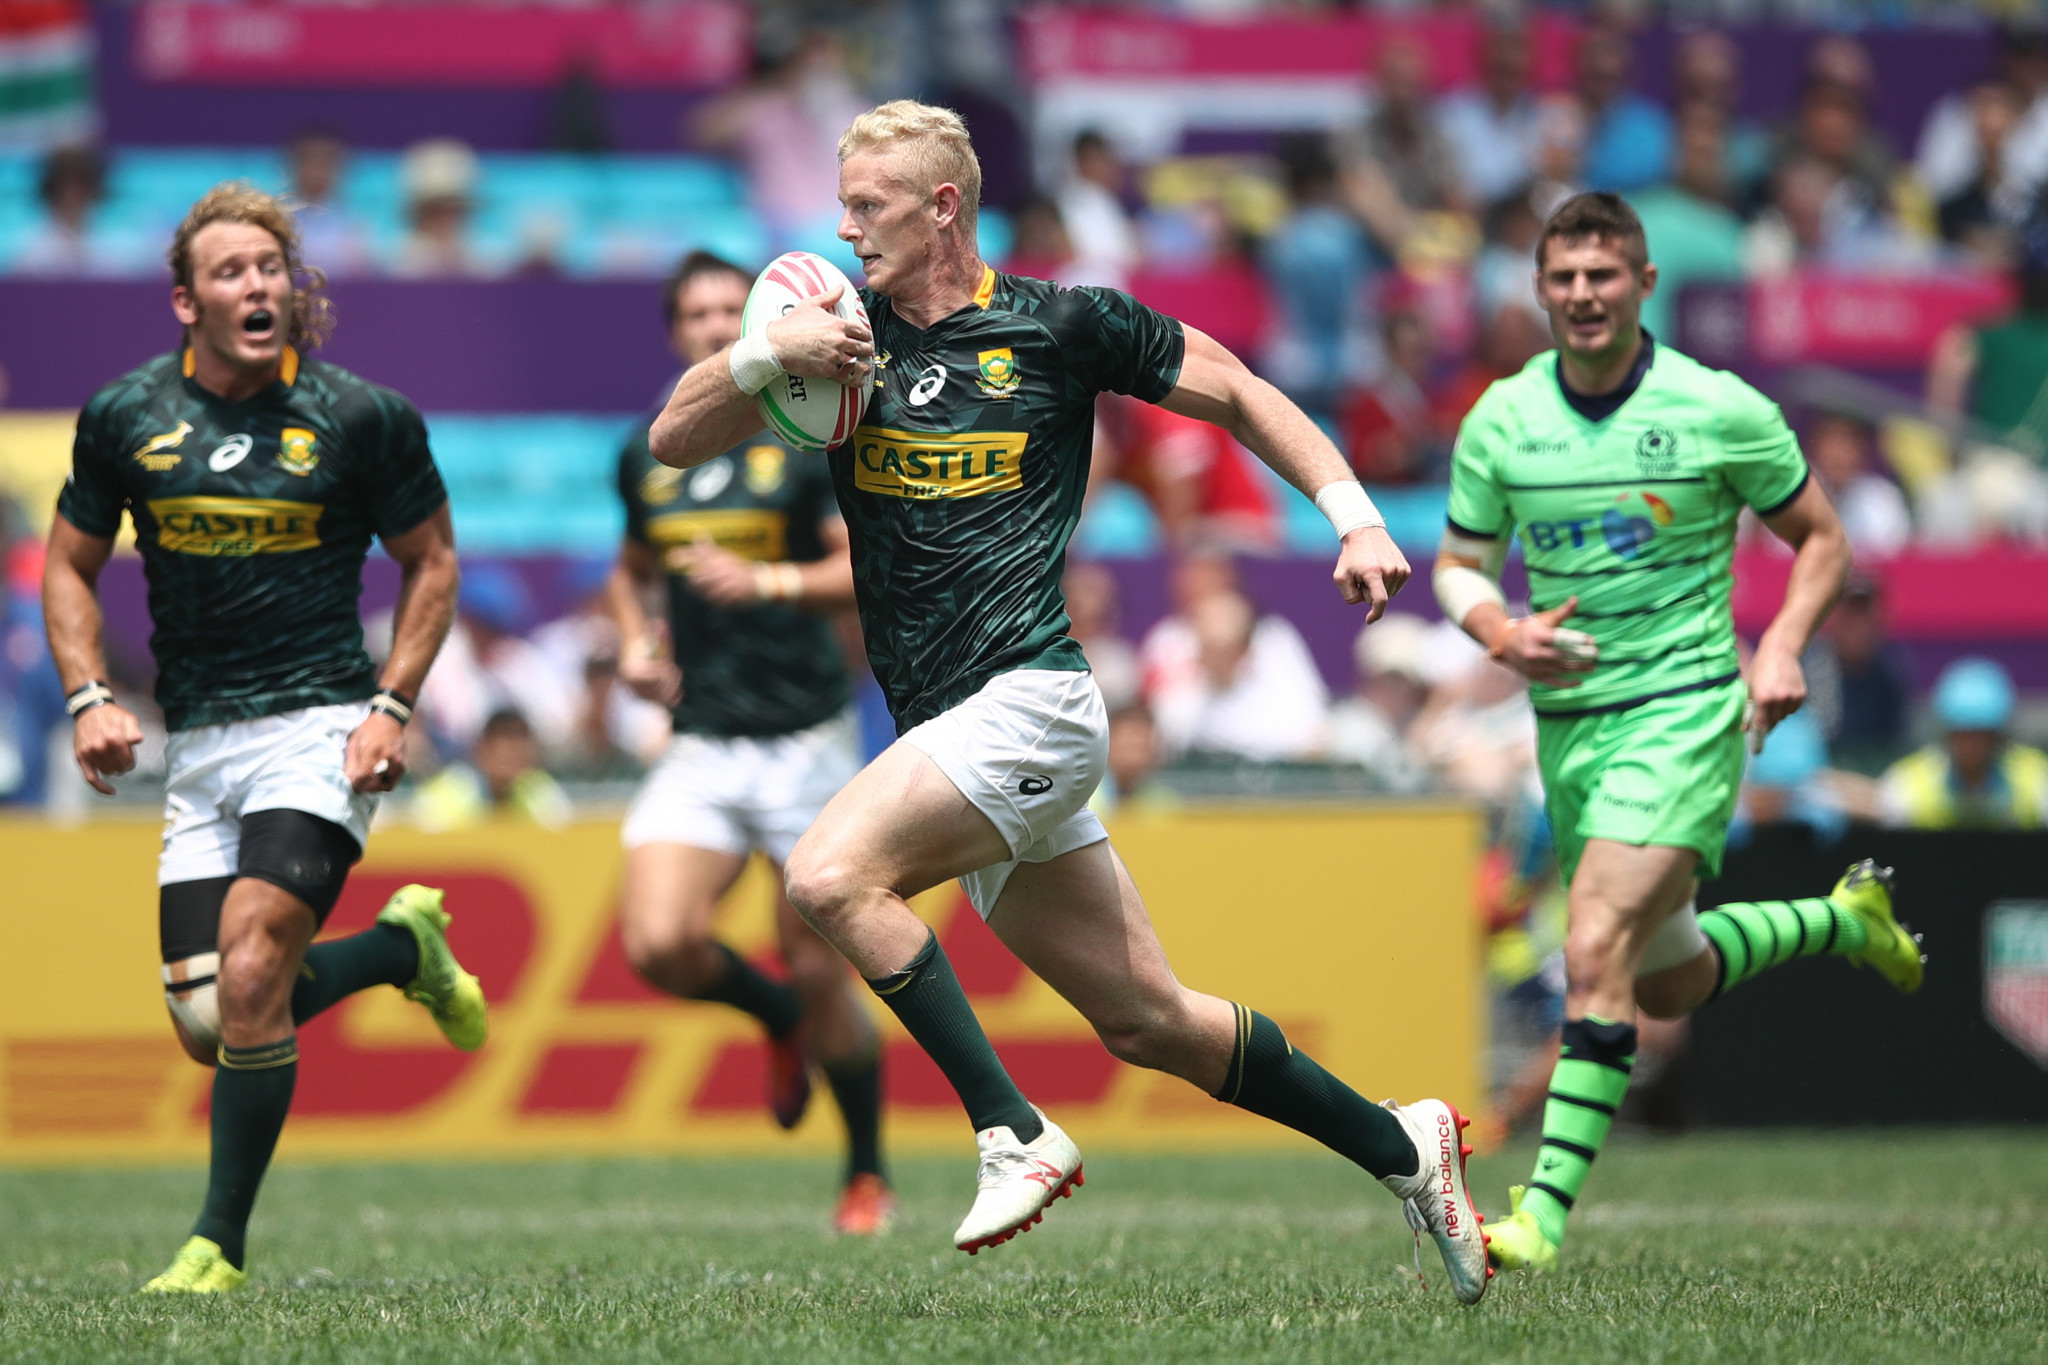 Overall leaders United States to meet South Africa in quarter-finals at Hong Kong Sevens